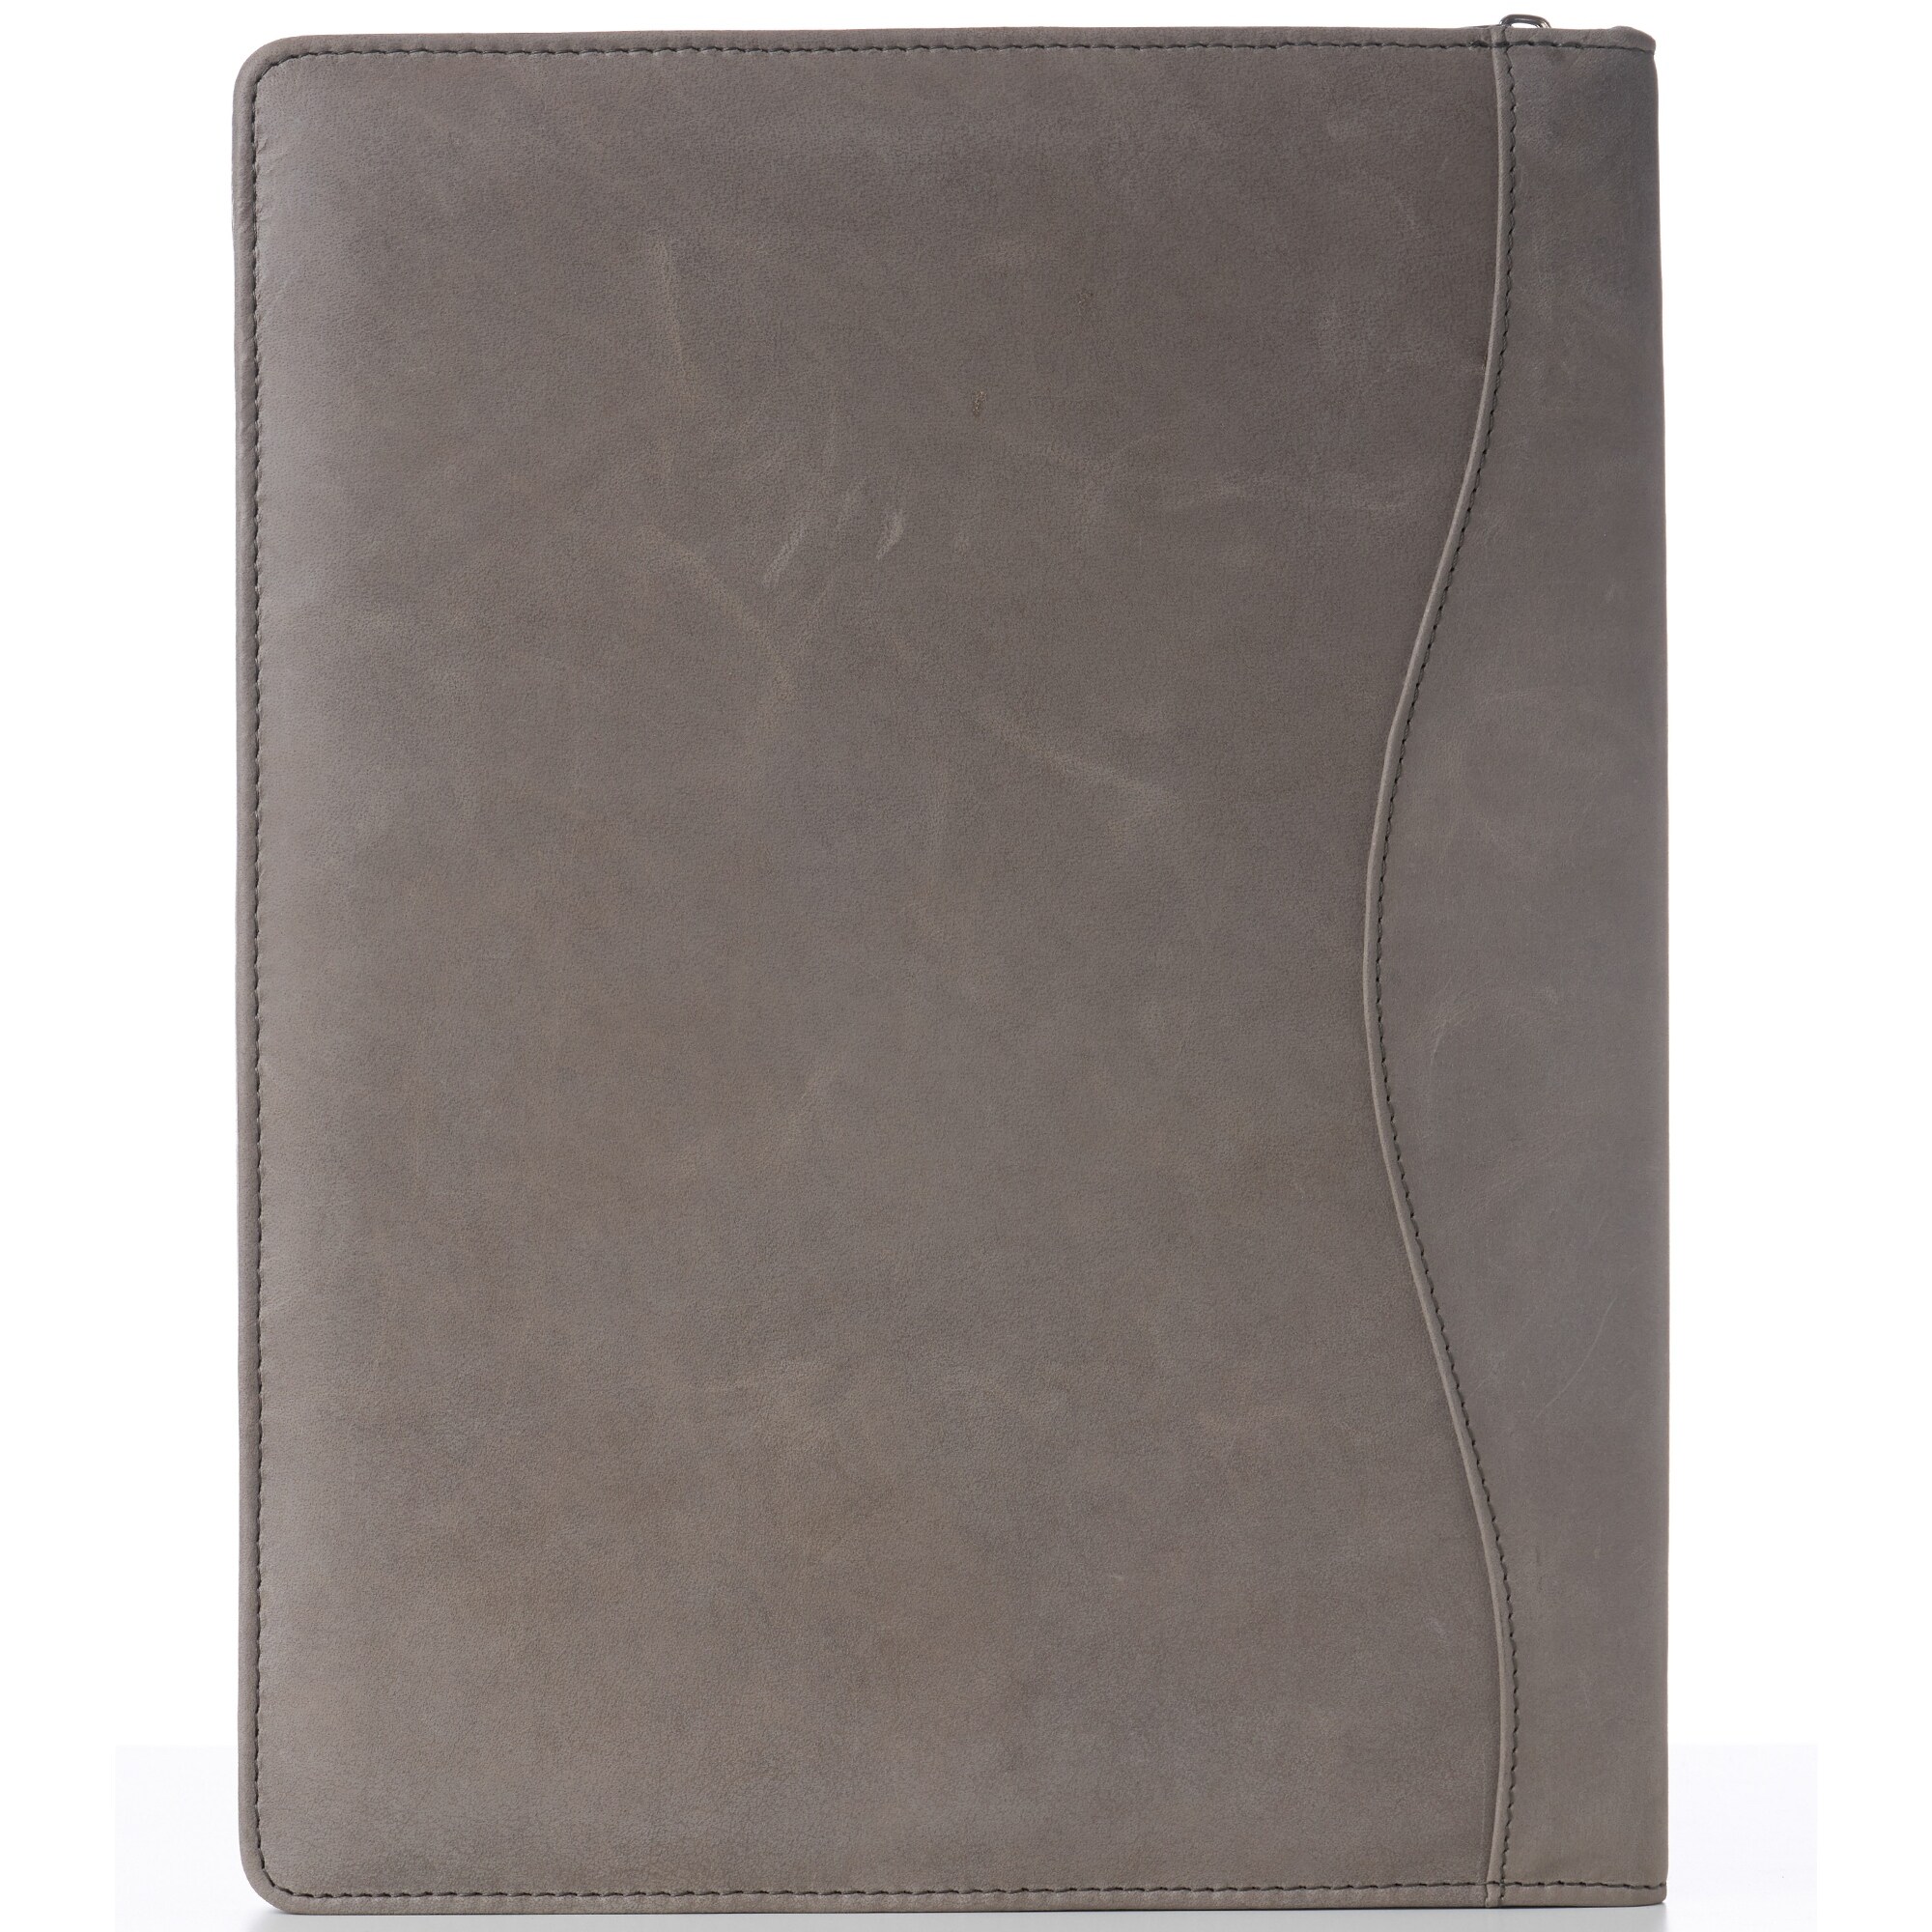 Genuine Leather Portfolio Writing Pad Business Case for Left & Right Handed Use